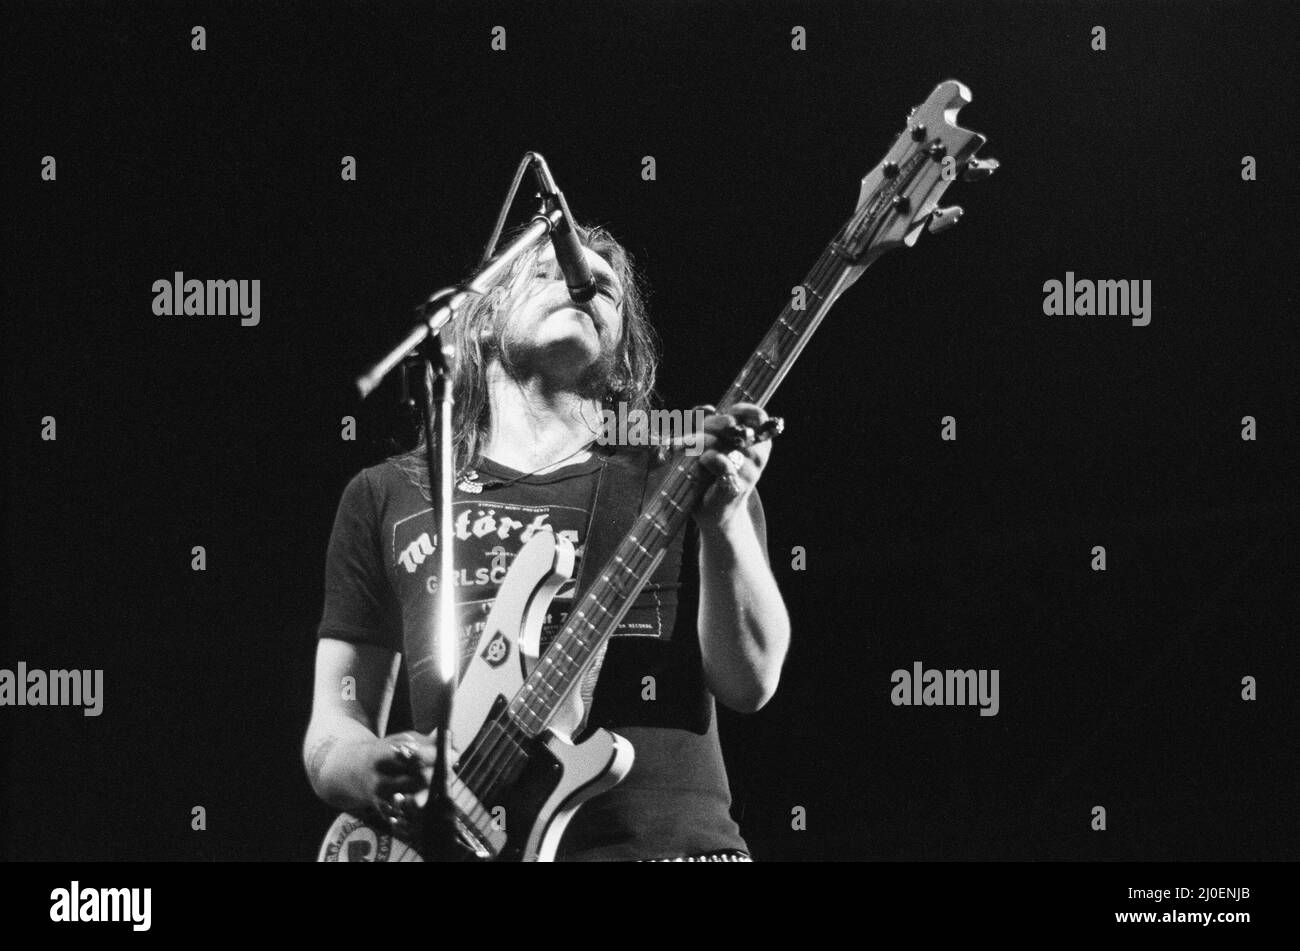 Ian Lemmy Kilmister founder and lead singer with the band Motorhead, seen here performing on stage at the Reading Rock Festival. 24th August 1979 Stock Photo